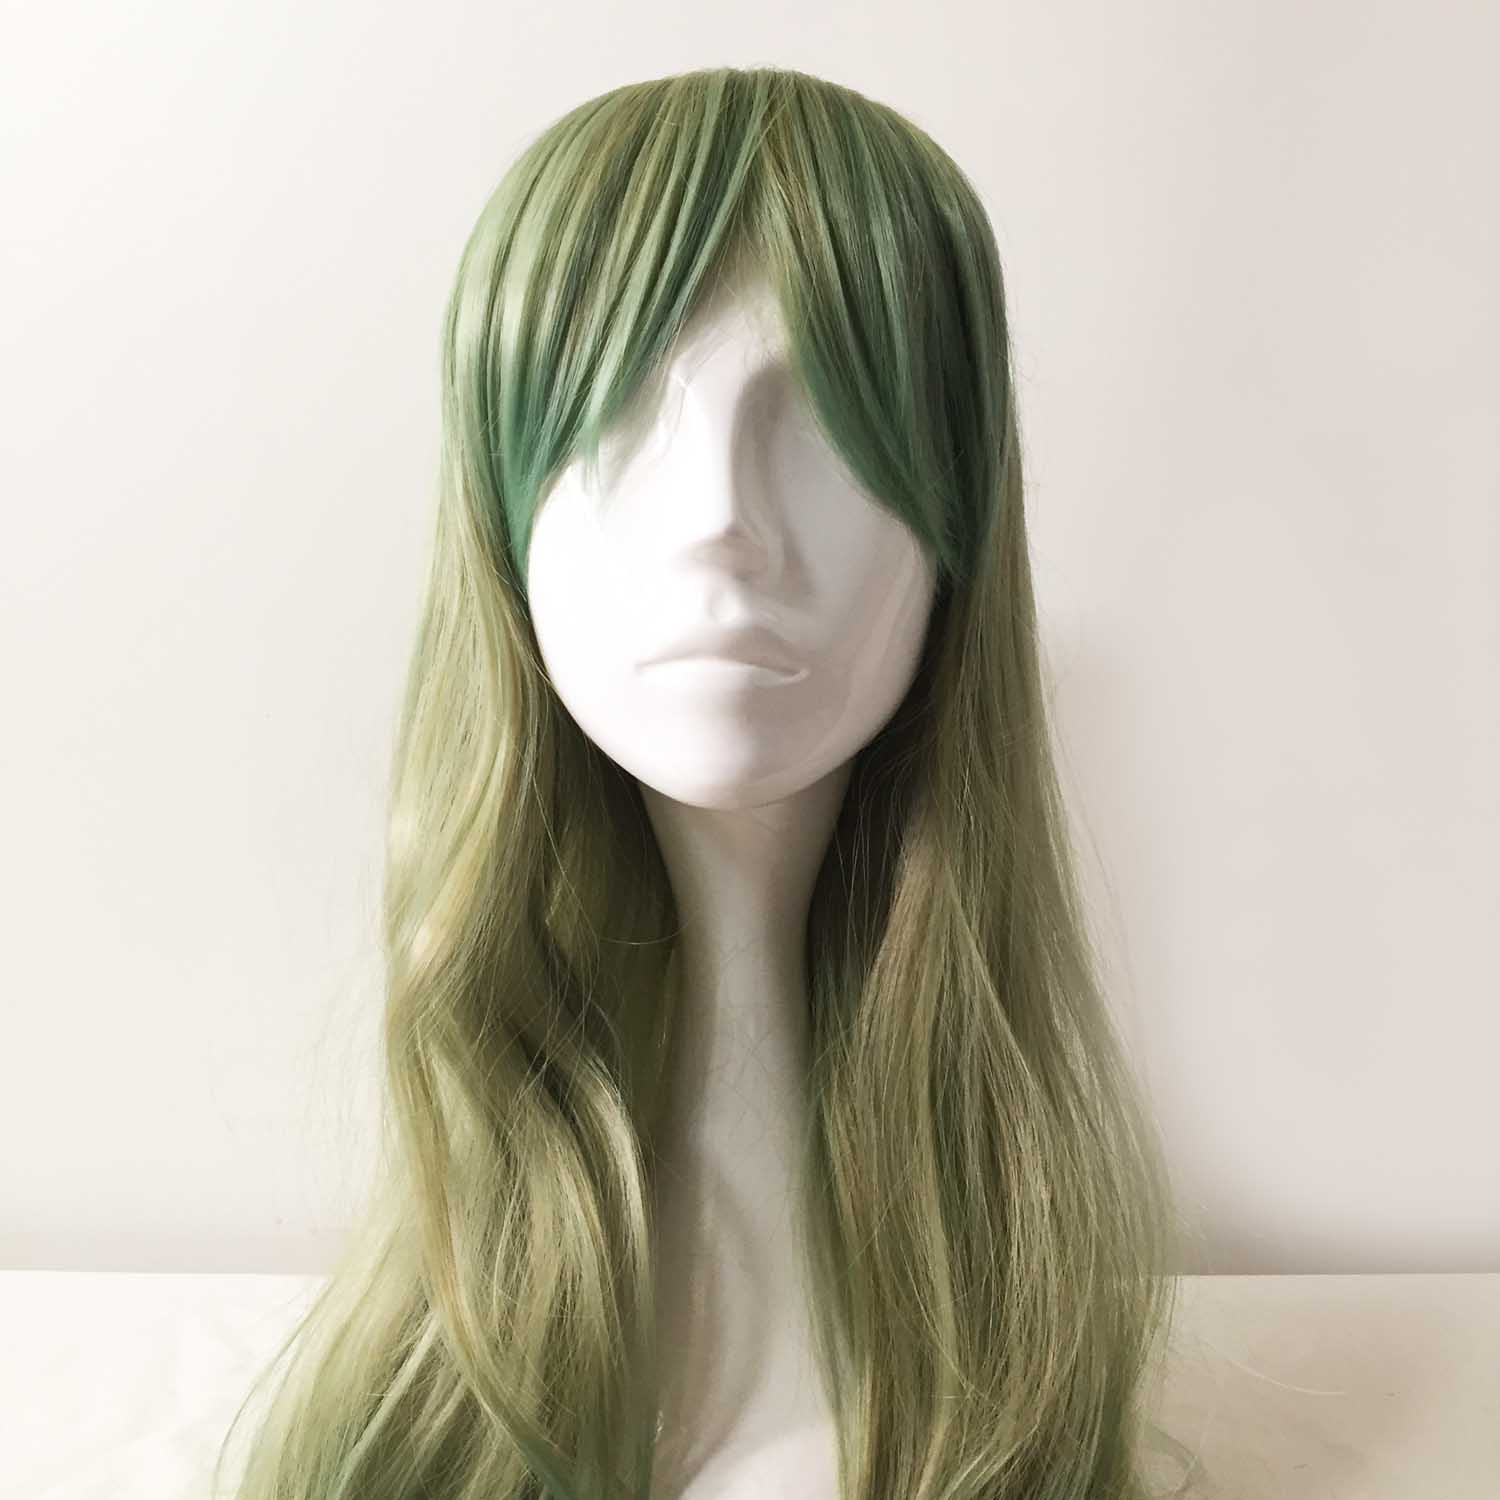 nevermindyrhead Women Green Ombre Long Straight Fringe Bangs Cosplay Wig